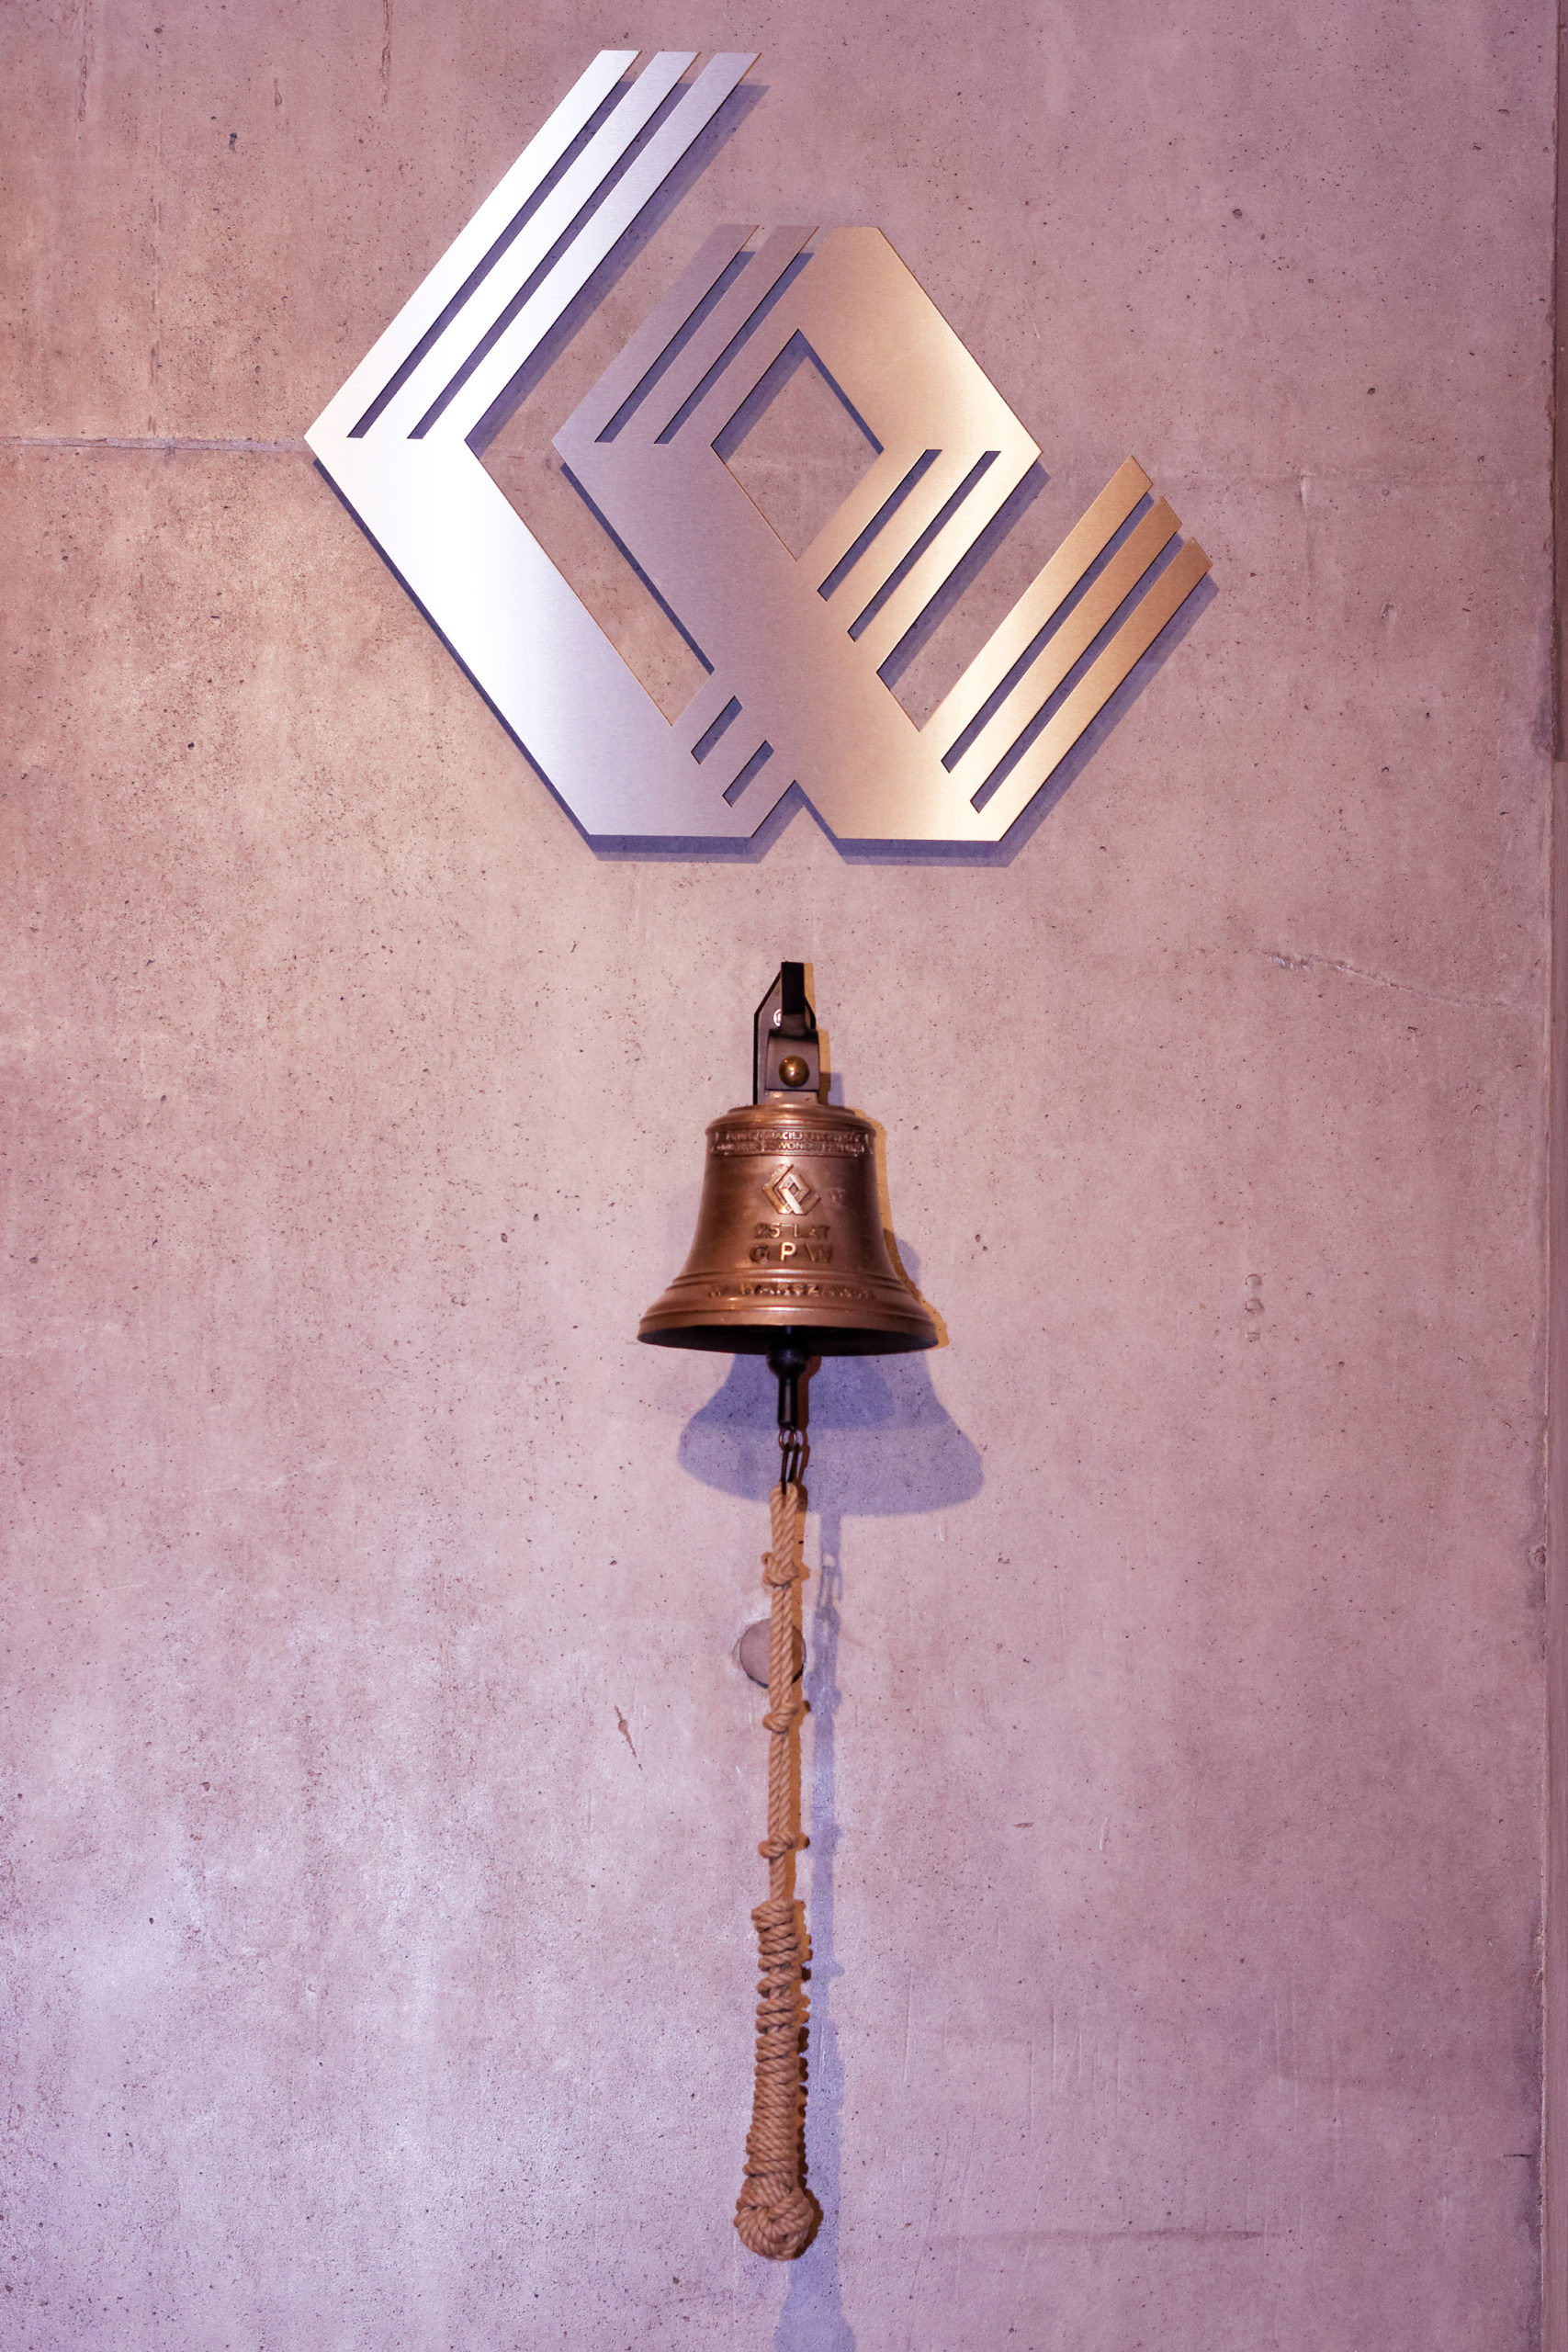 Warsaw Stock Exchange - bell and logotype in trading hall - Wars